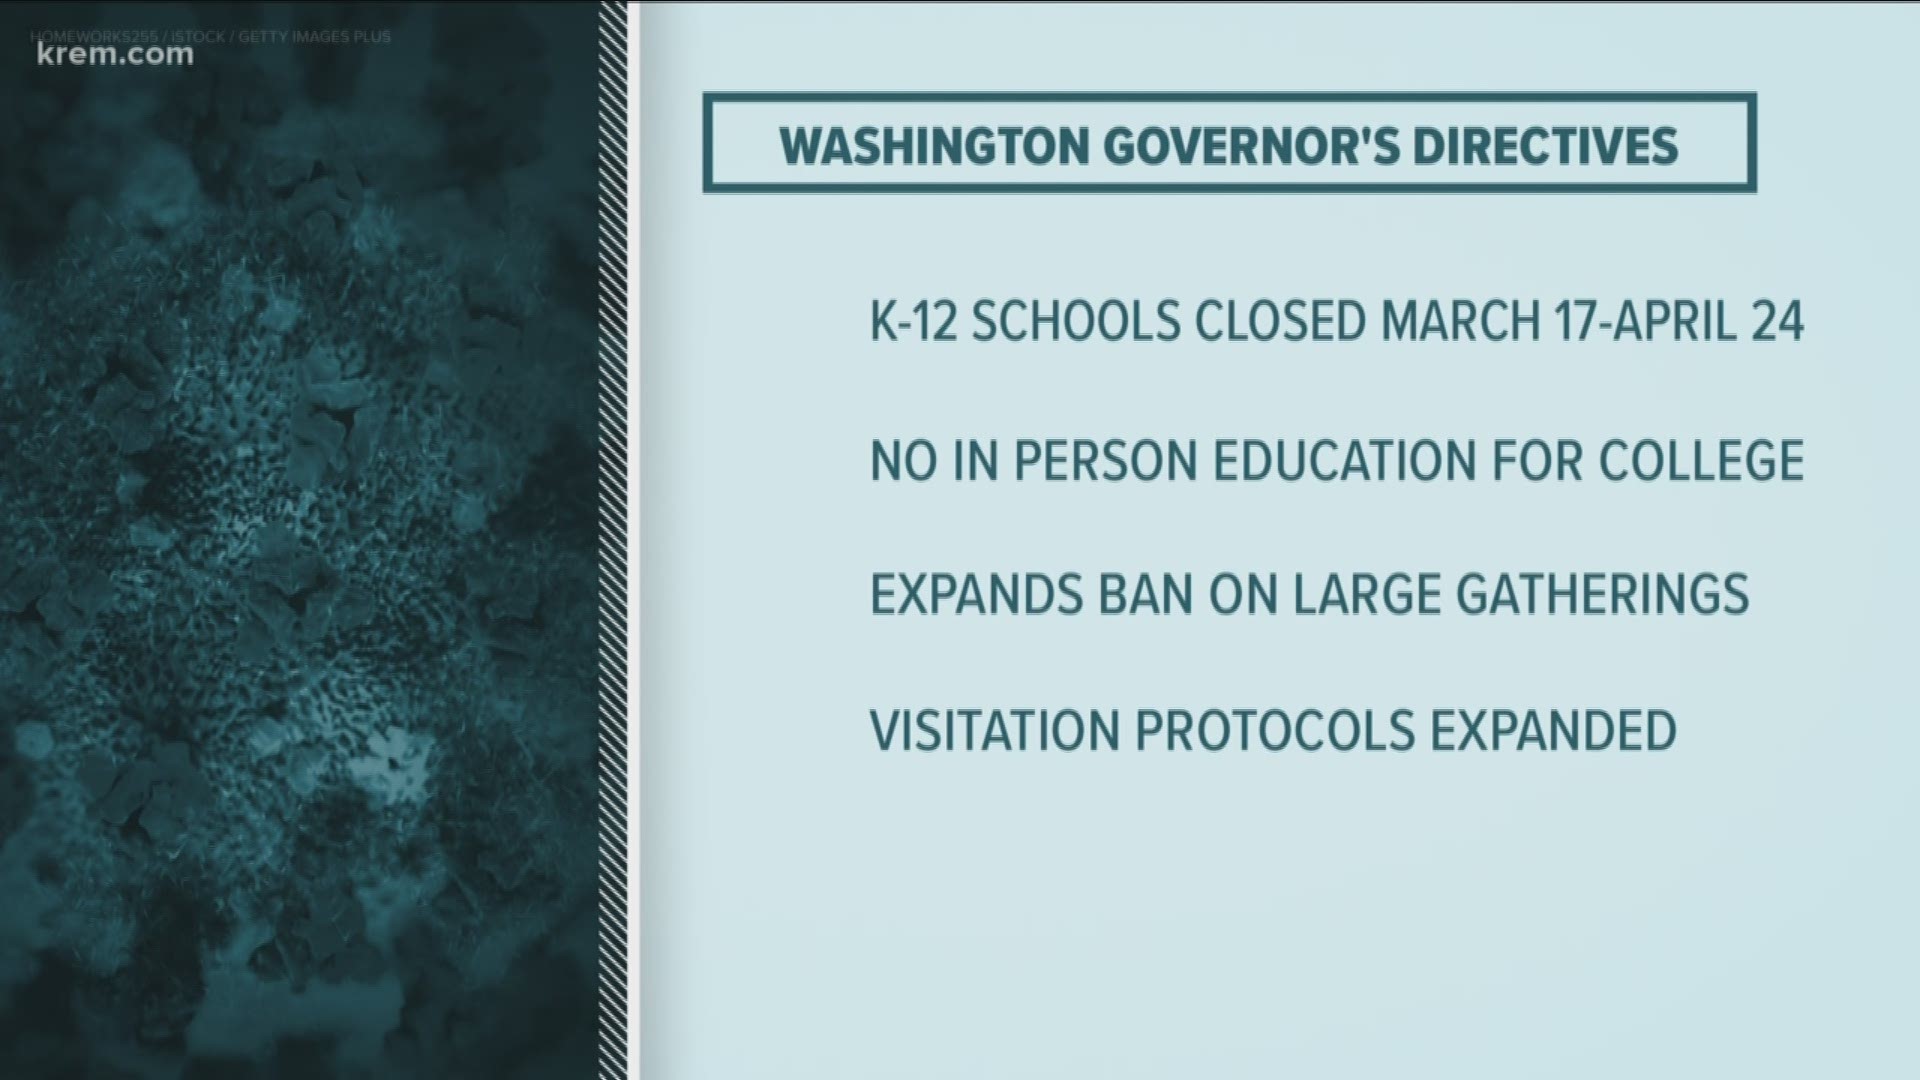 Restrictions on schools and gatherings that were put in place earlier this week for King, Snohomish and Pierce counties have been expanded statewide in response to